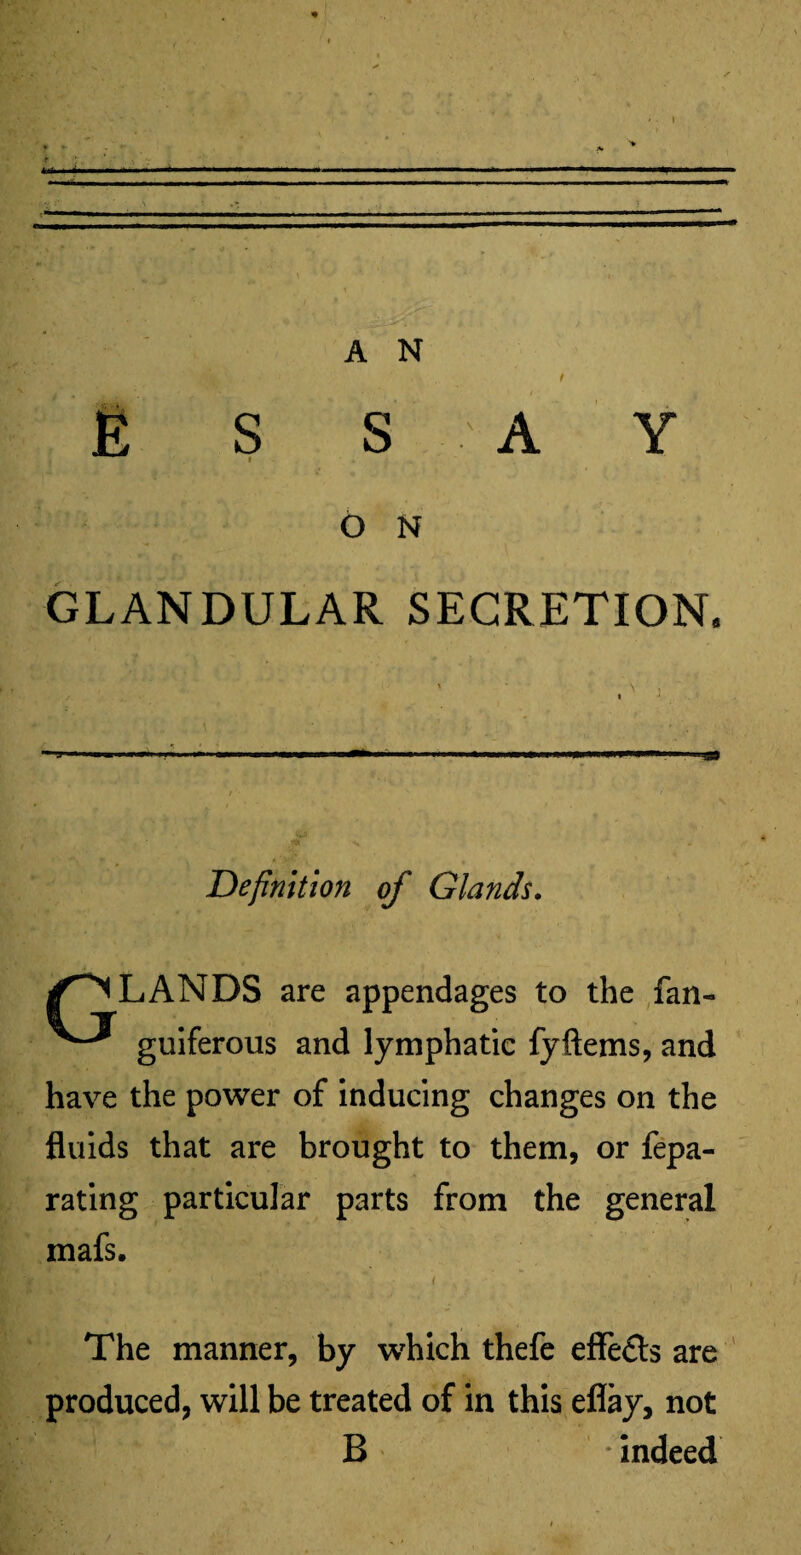 fik \ t E S S A Y 6 N GLANDULAR SECRETION. Definition of Glands. /ELANDS are appendages to the fan- guiferous and lymphatic fyftems, and have the power of inducing changes on the fluids that are brought to them, or fepa- rating particular parts from the general mafs. The manner, by which thefe effe&s are produced, will be treated of in this eflay, not B indeed